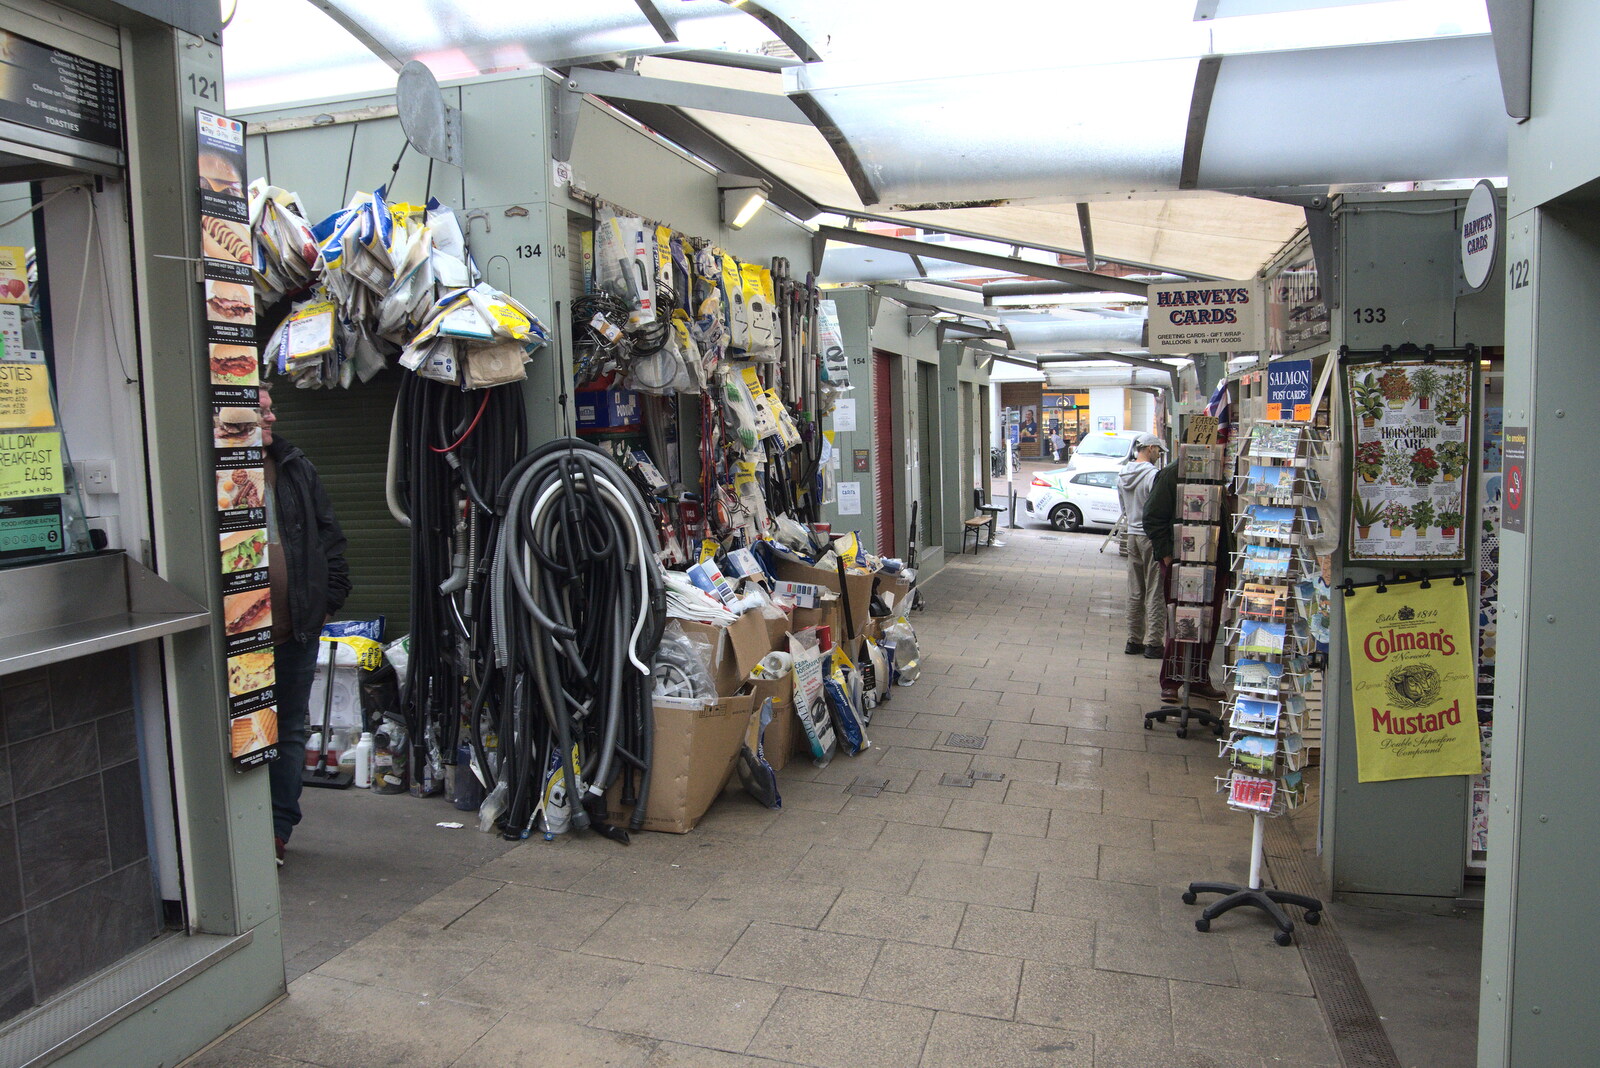 A Hoover spares stall from Discovering the Hidden City: Norwich, Norfolk - 23rd May 2022